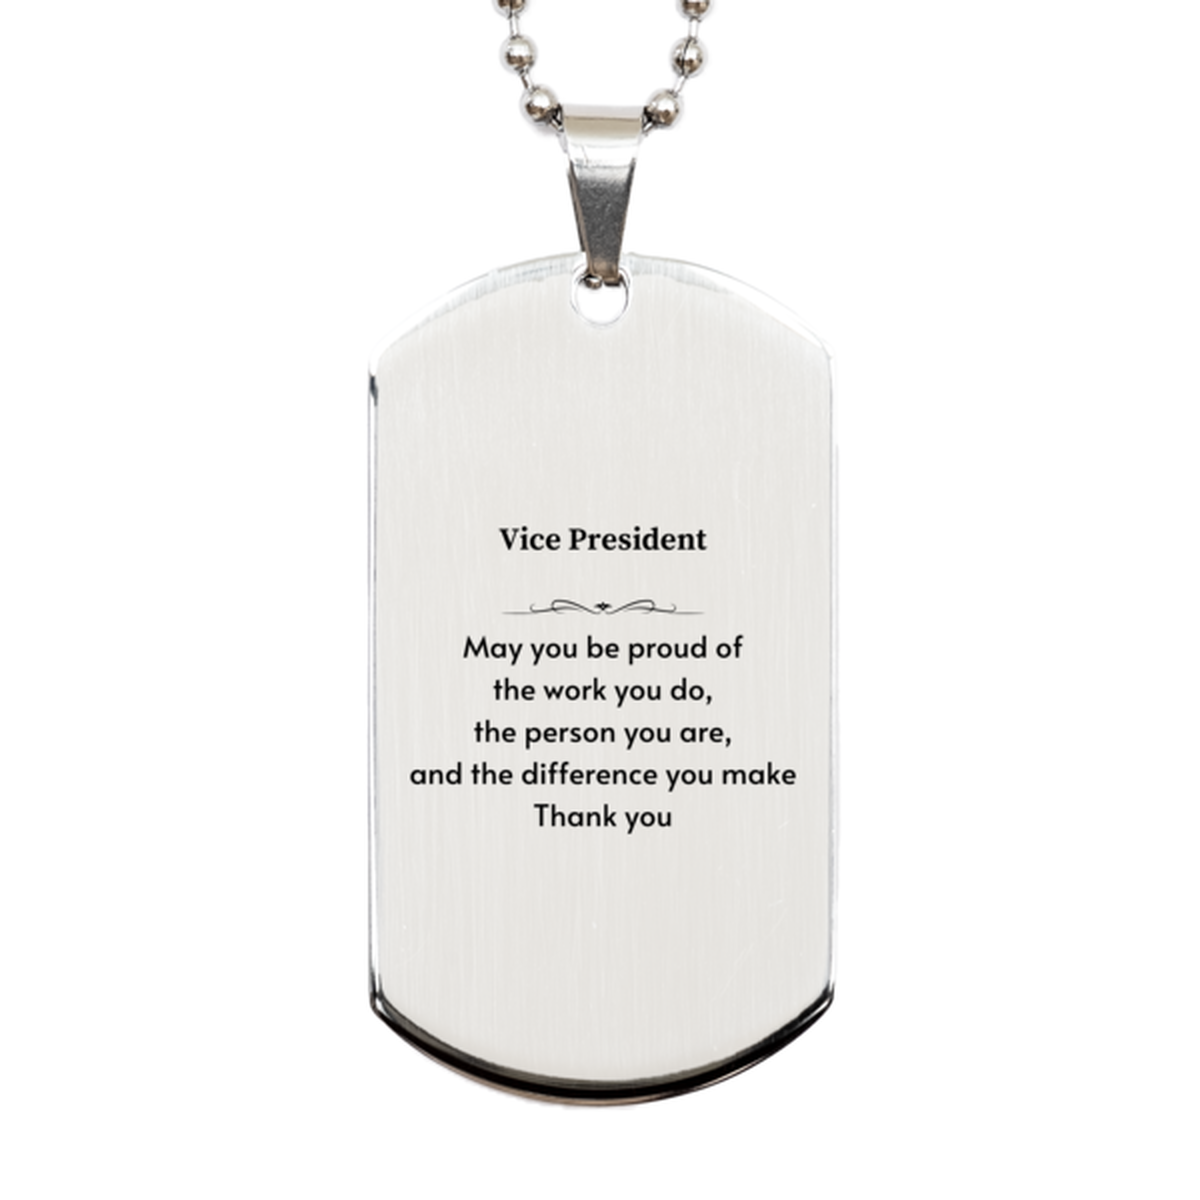 Heartwarming Silver Dog Tag Retirement Coworkers Gifts for Vice President, Vice President May You be proud of the work you do, the person you are Gifts for Boss Men Women Friends